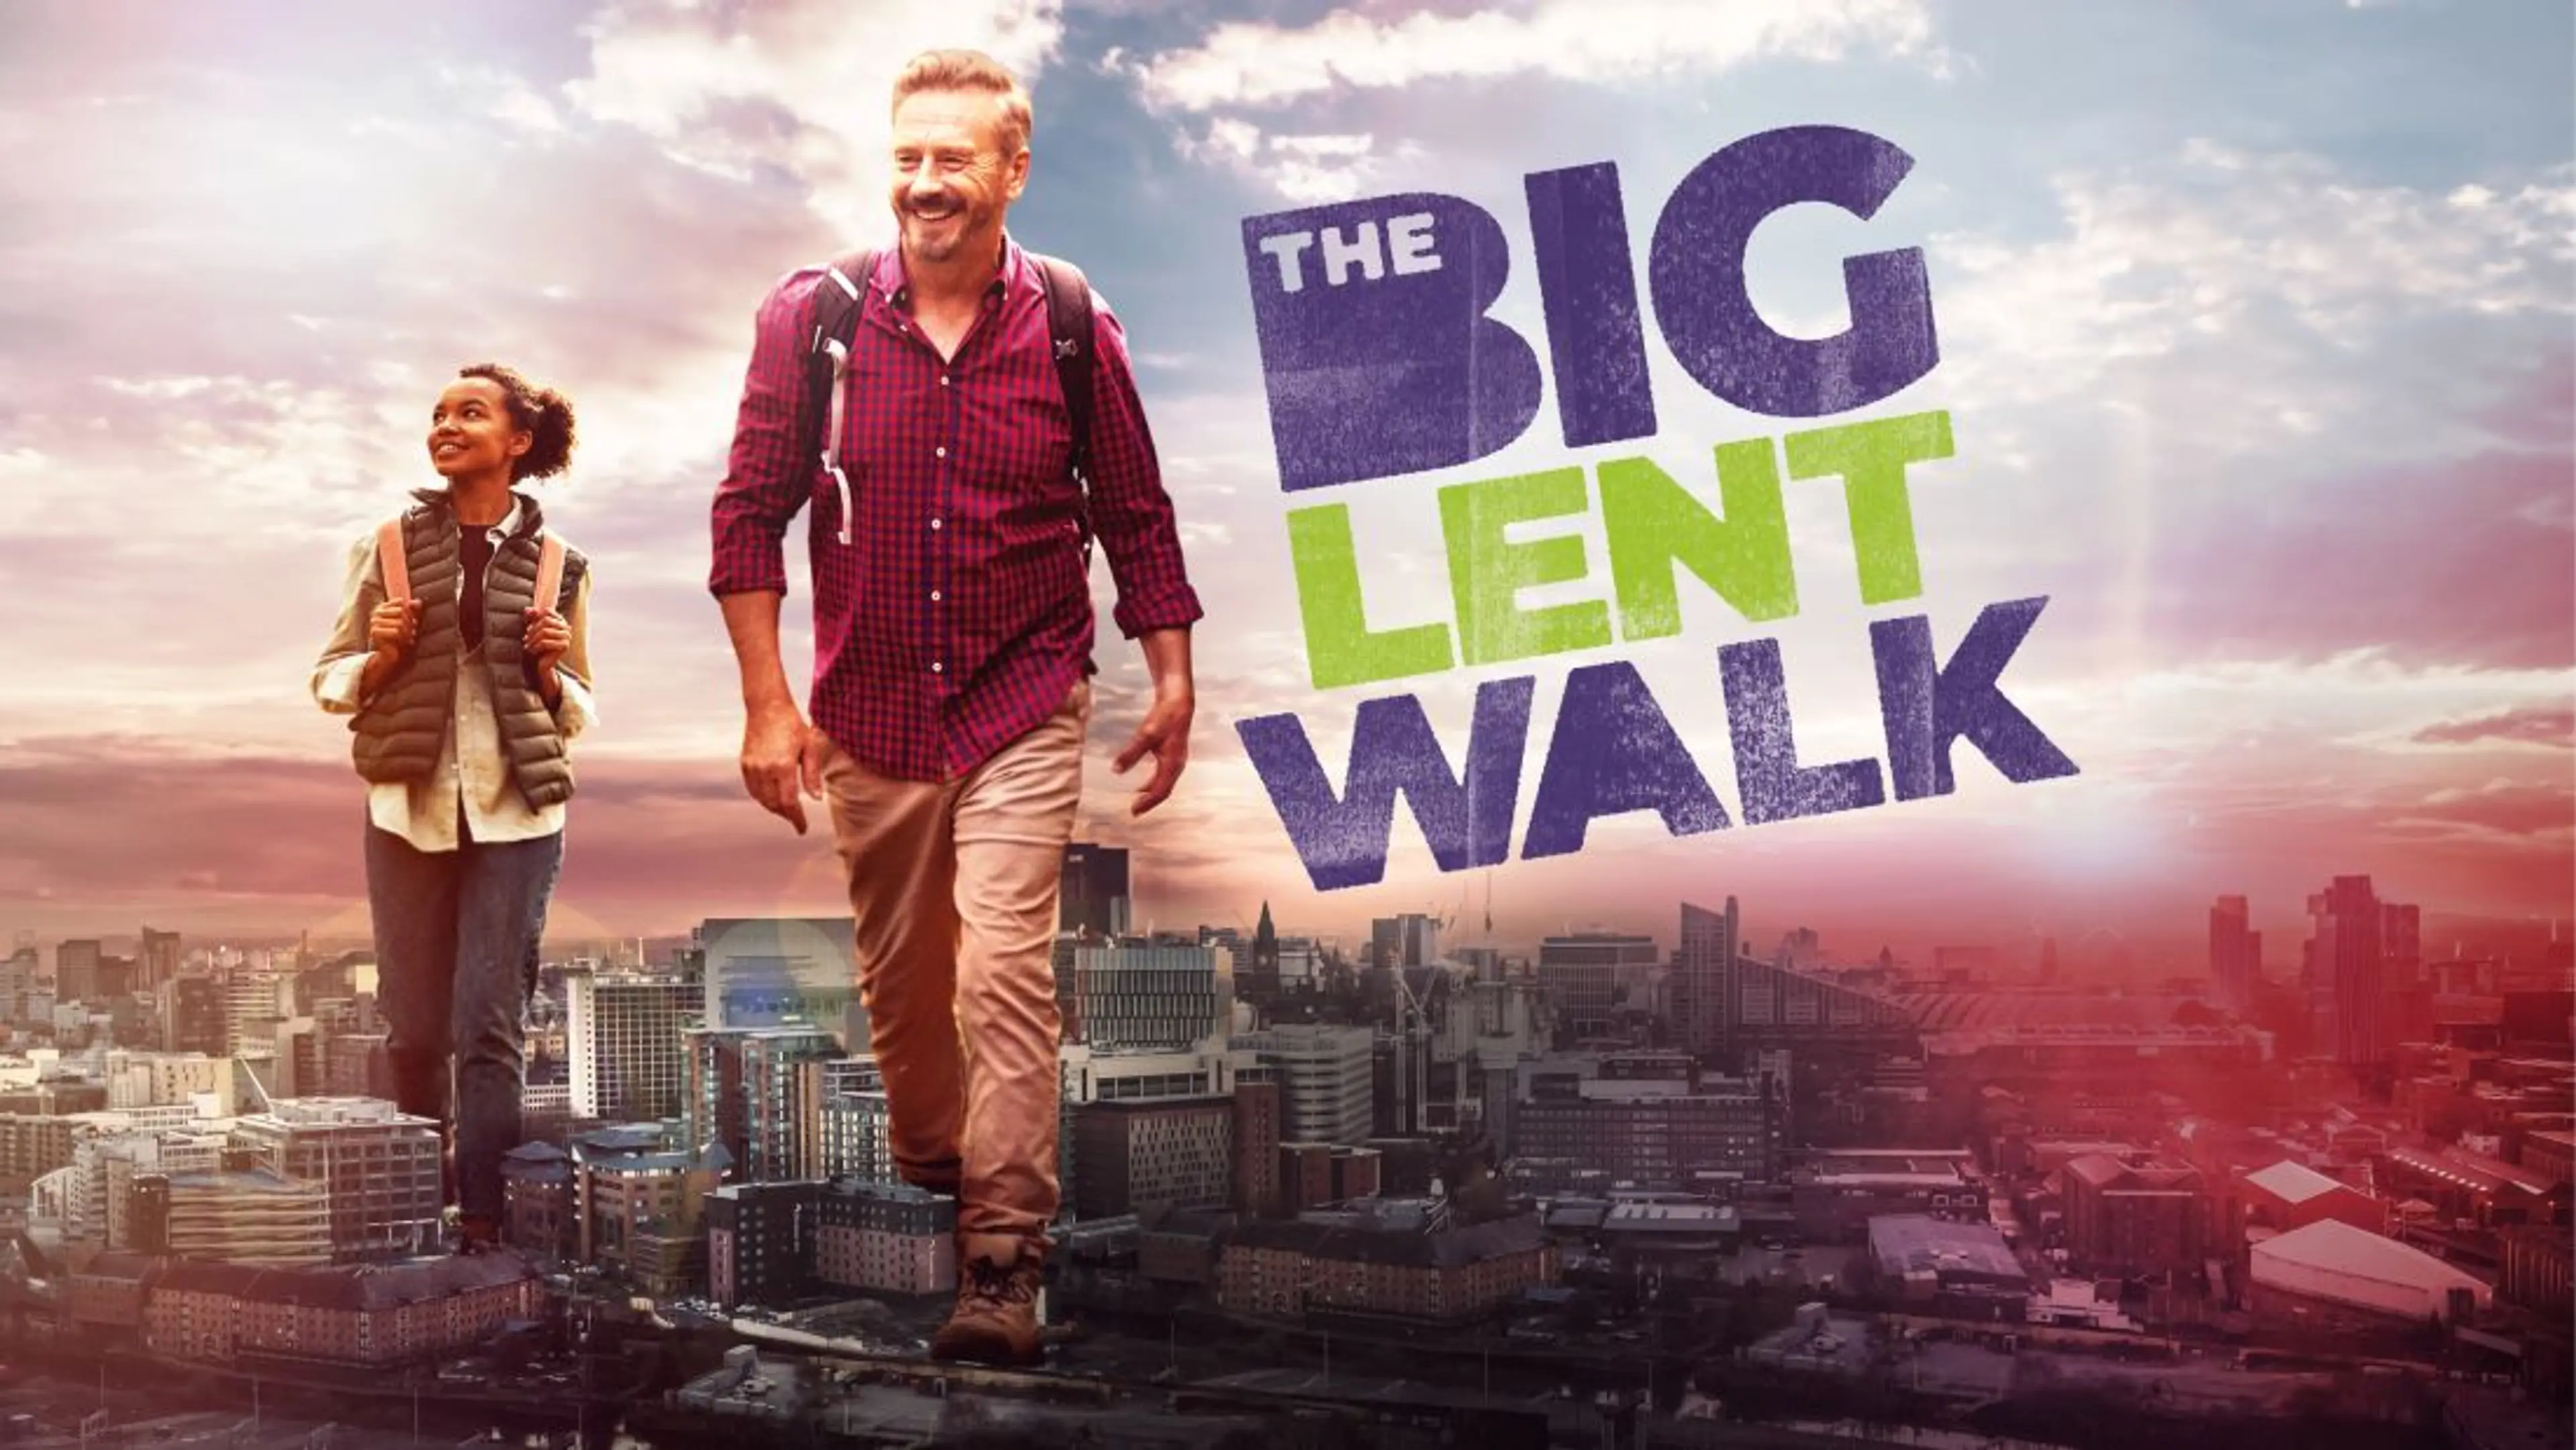 Tell families about your Big Lent Walk